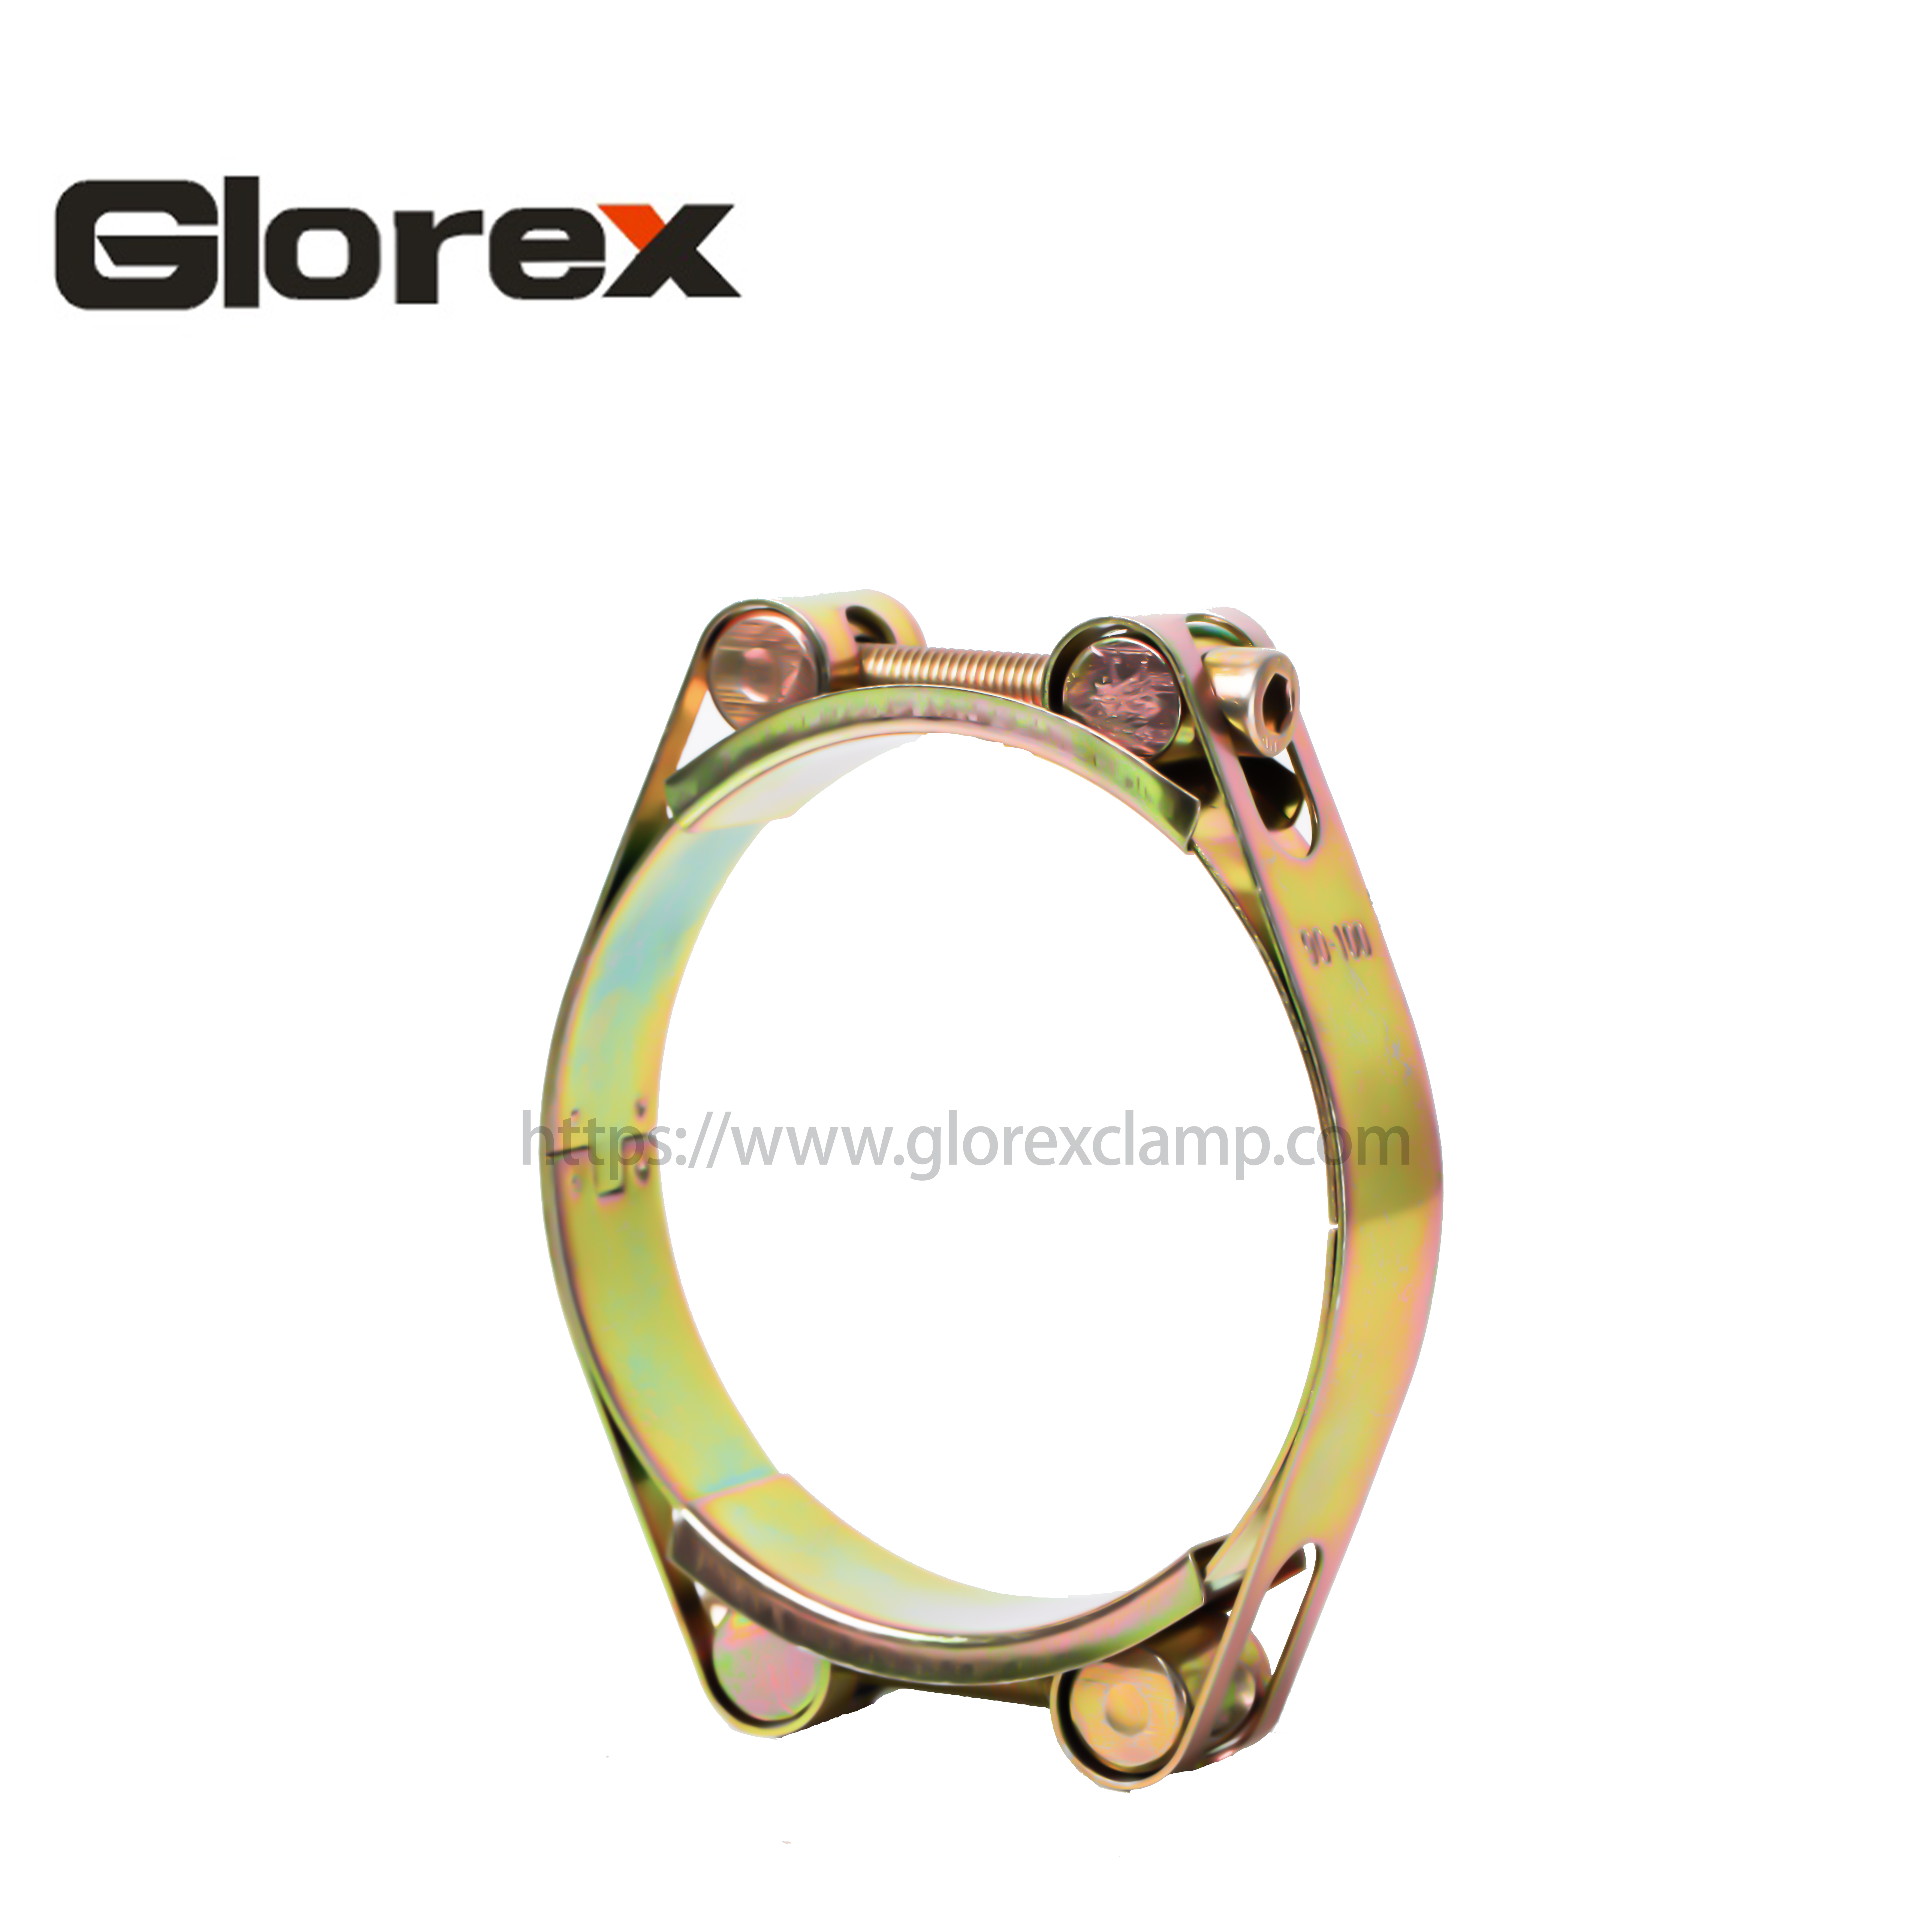 100% Original Factory 6mm Hose Clamp - Robust clamp with double bolts – Glorex